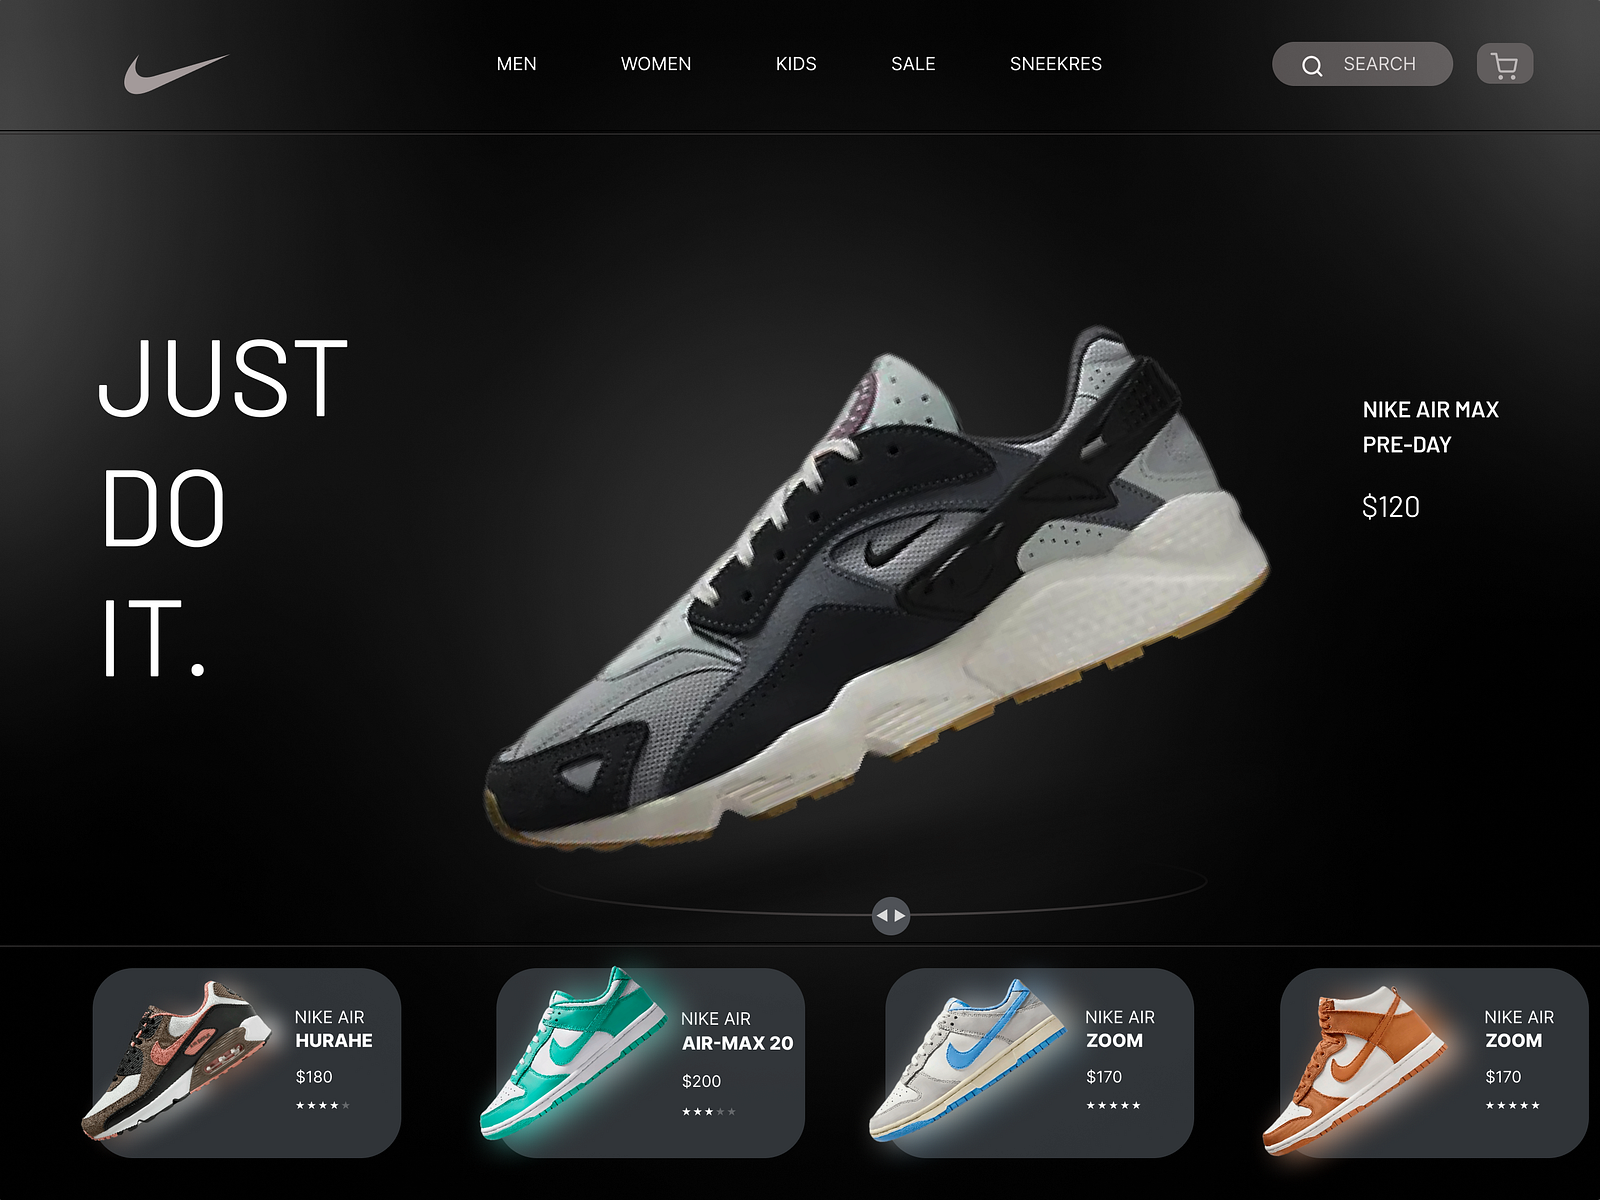 nike website redesigned by Eman fatima on Dribbble